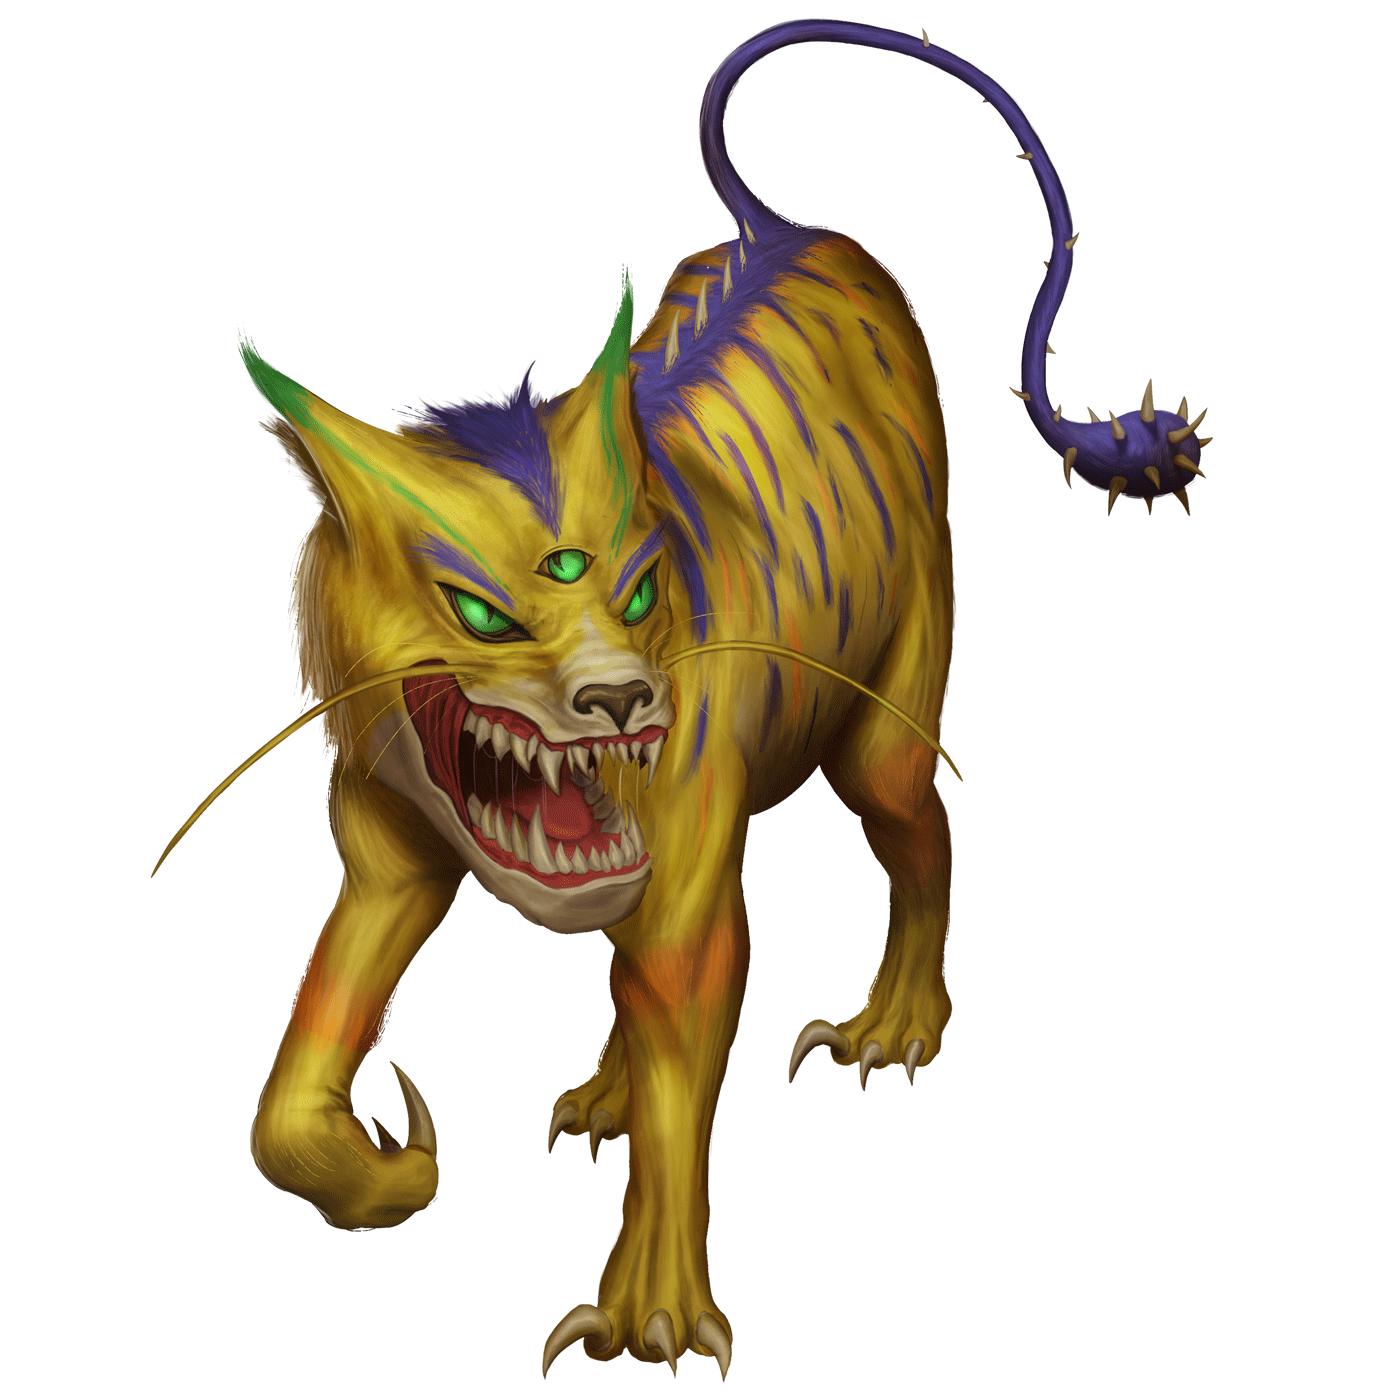 A Zrulicat, a yellow cat-like creature with three eyes, purple stripes running down its back, and a spiked tail